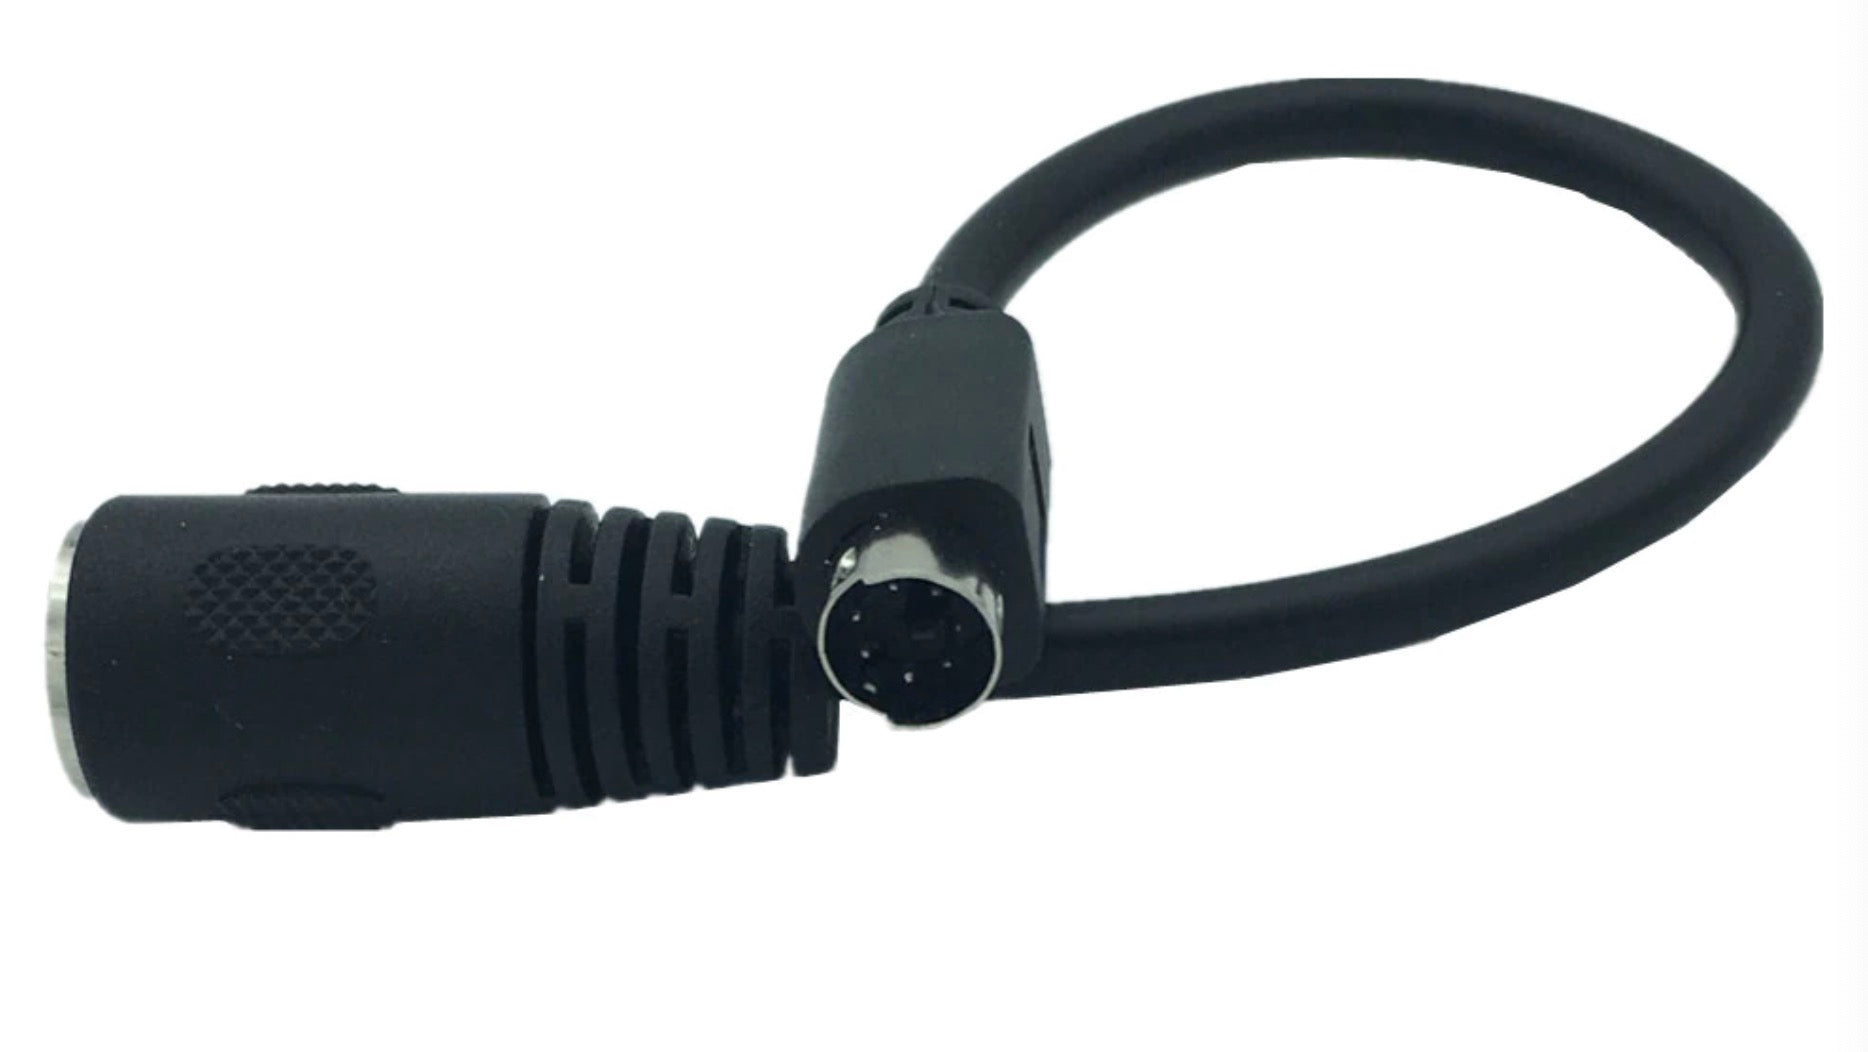 6-pin Mini Din PS2 Male Plug to 5-pin Din Female Keyboard Adapter Converter Cable